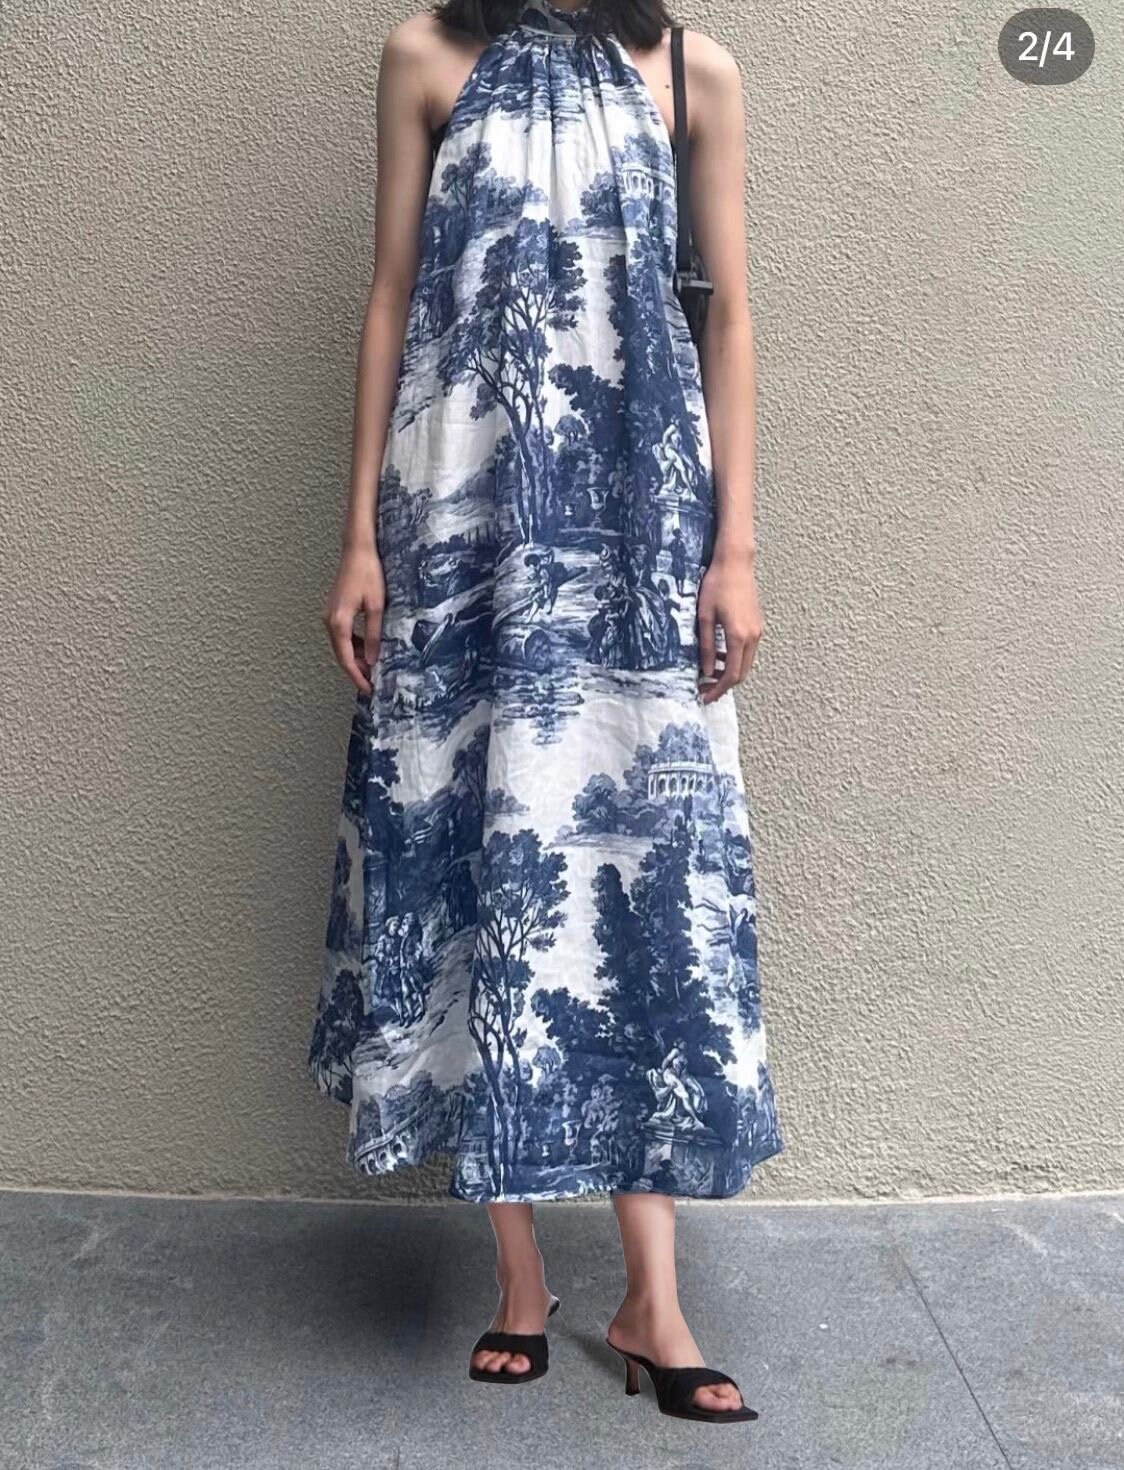 Long Maxi Dress for Women, Summer Sun Dresses with Pockets Spaghetti Strap  Sleeveless Floral Casual Wedding Guest Dresses # Clearance Items Under 5  Dollars Under 20.00 Dollar Items For Women #2 